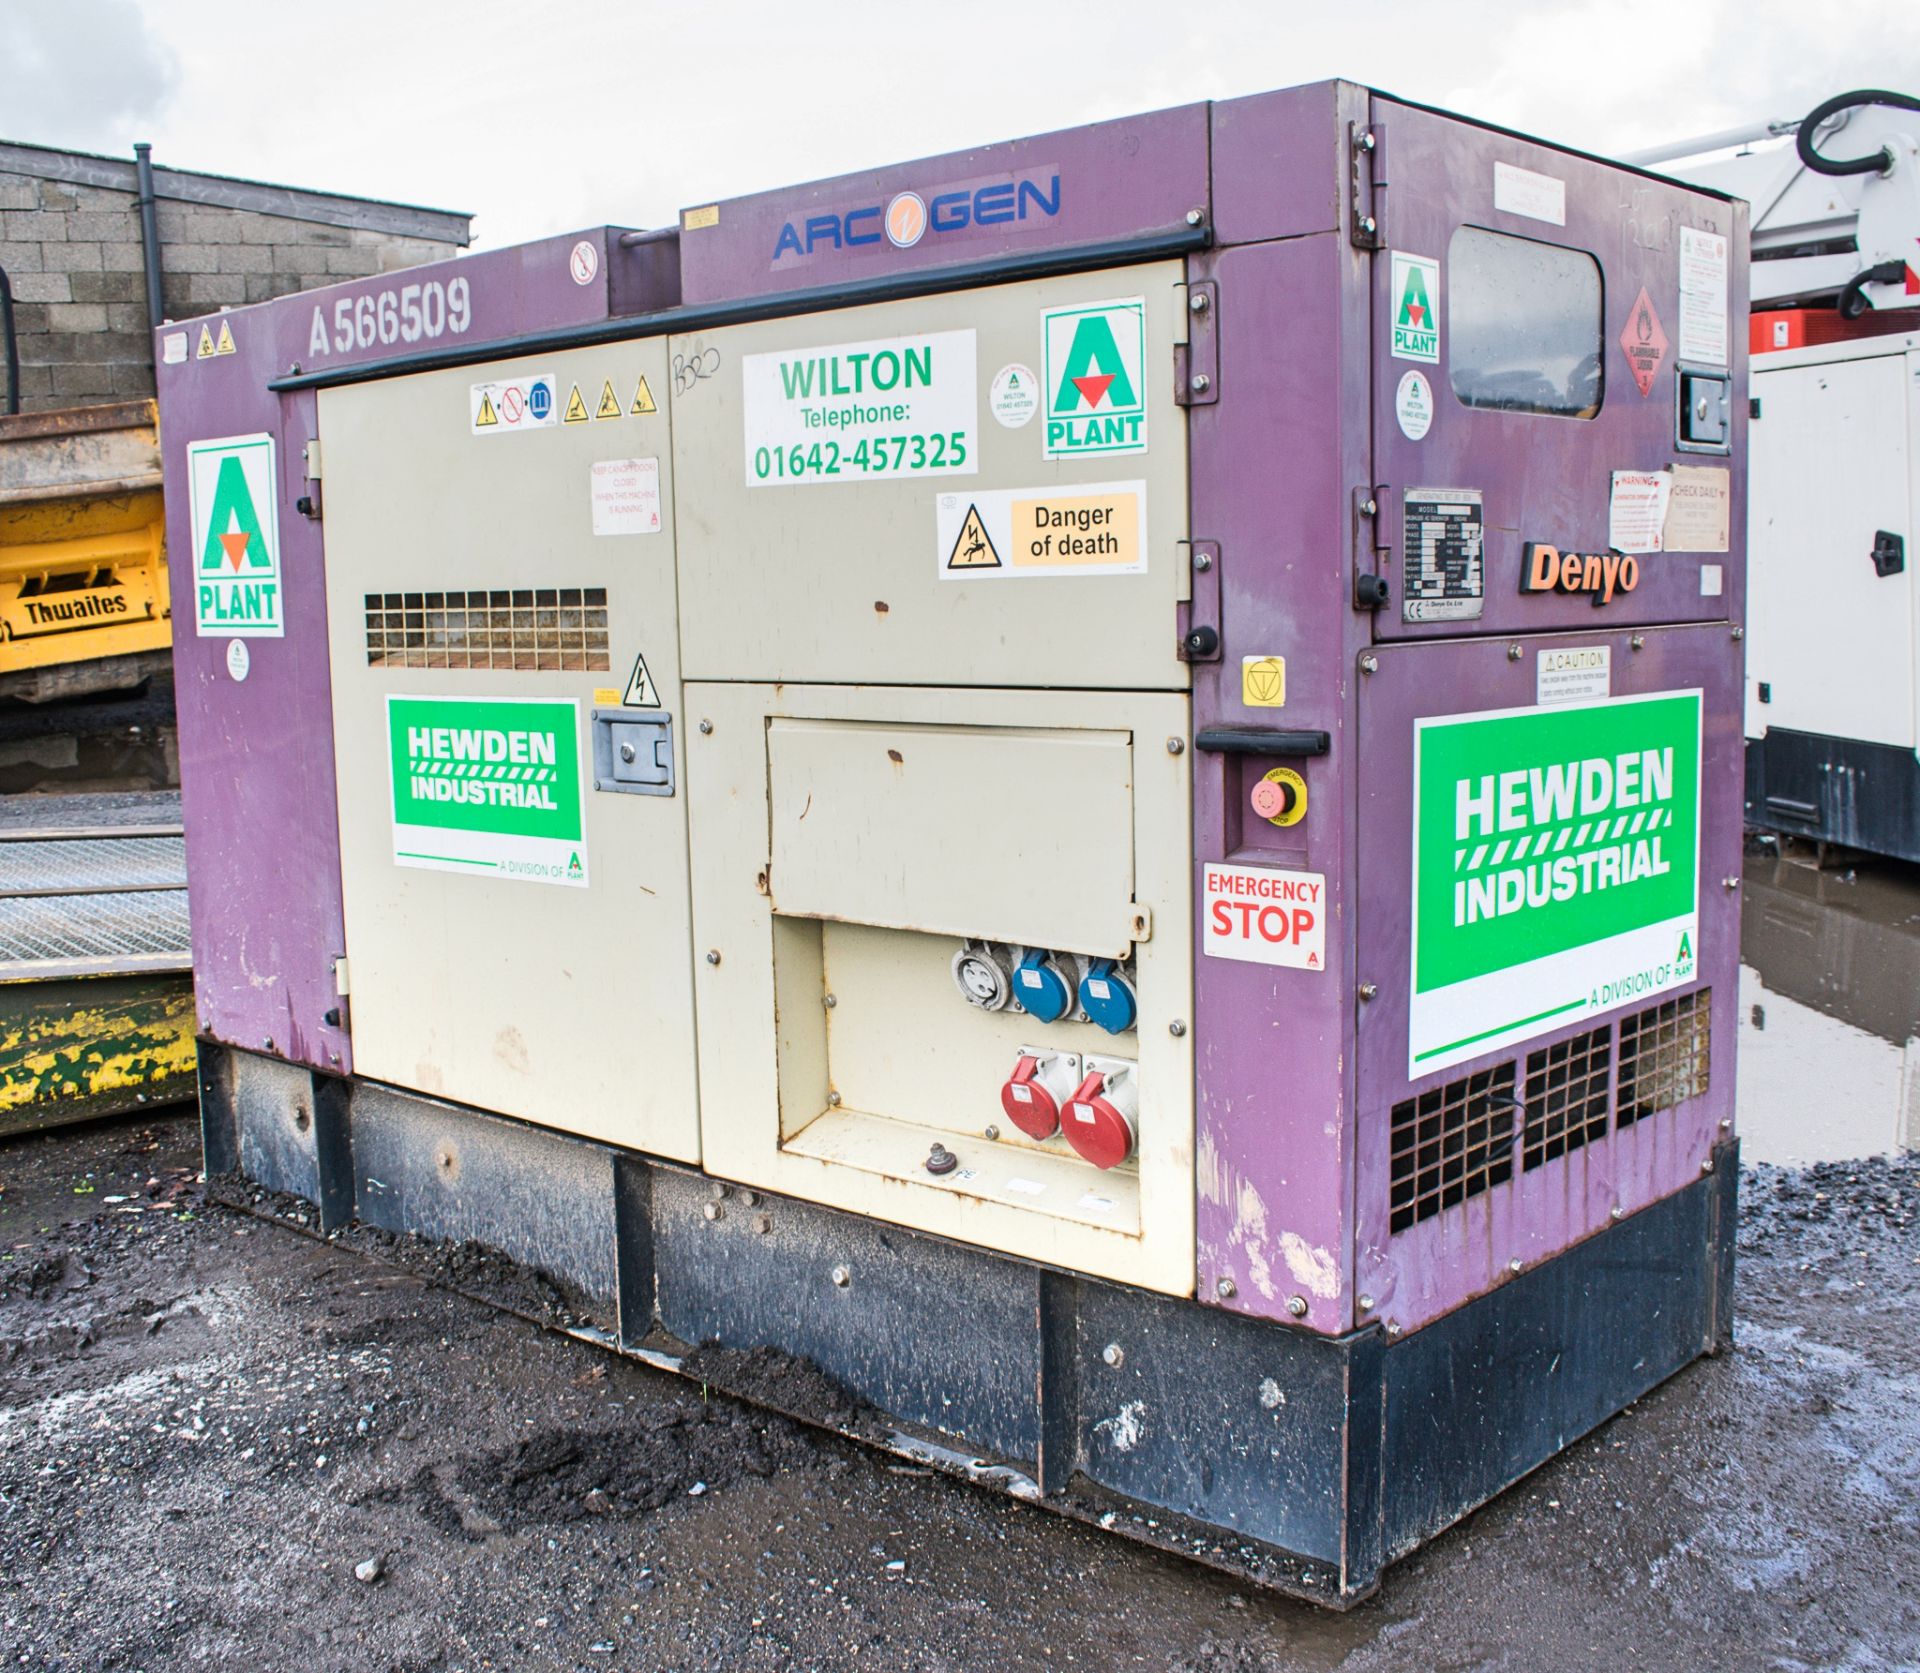 Denyo DCA-70 50 kva diesel driven generator Year: 2011 S/N: 3849695 Recorded Hours: 13,816 A566509 - Image 3 of 8